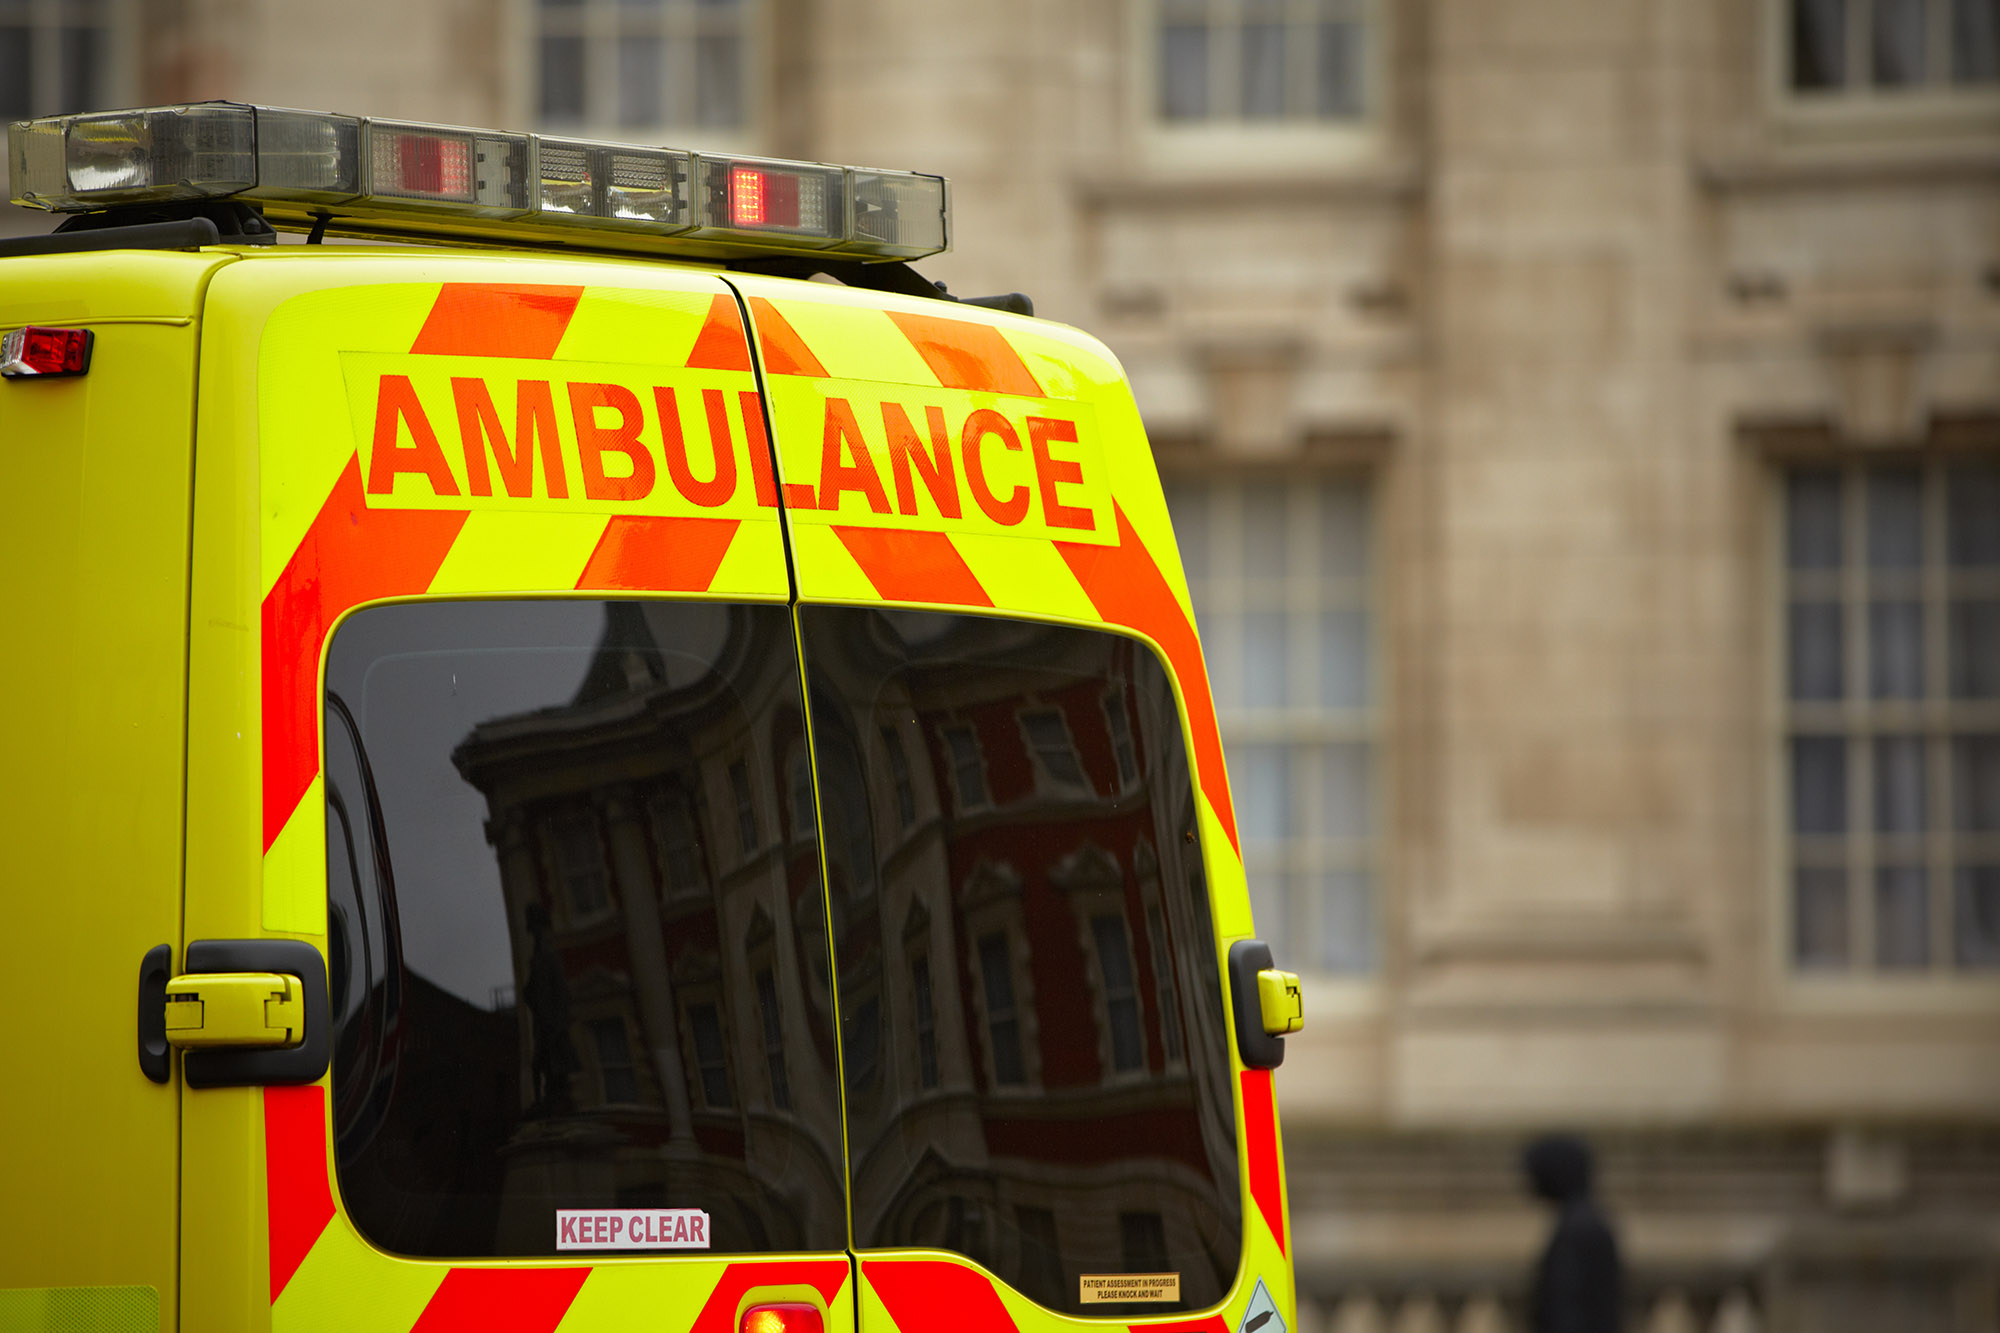 Ambulance, personal injury solicitors Bristol, accident claim managers